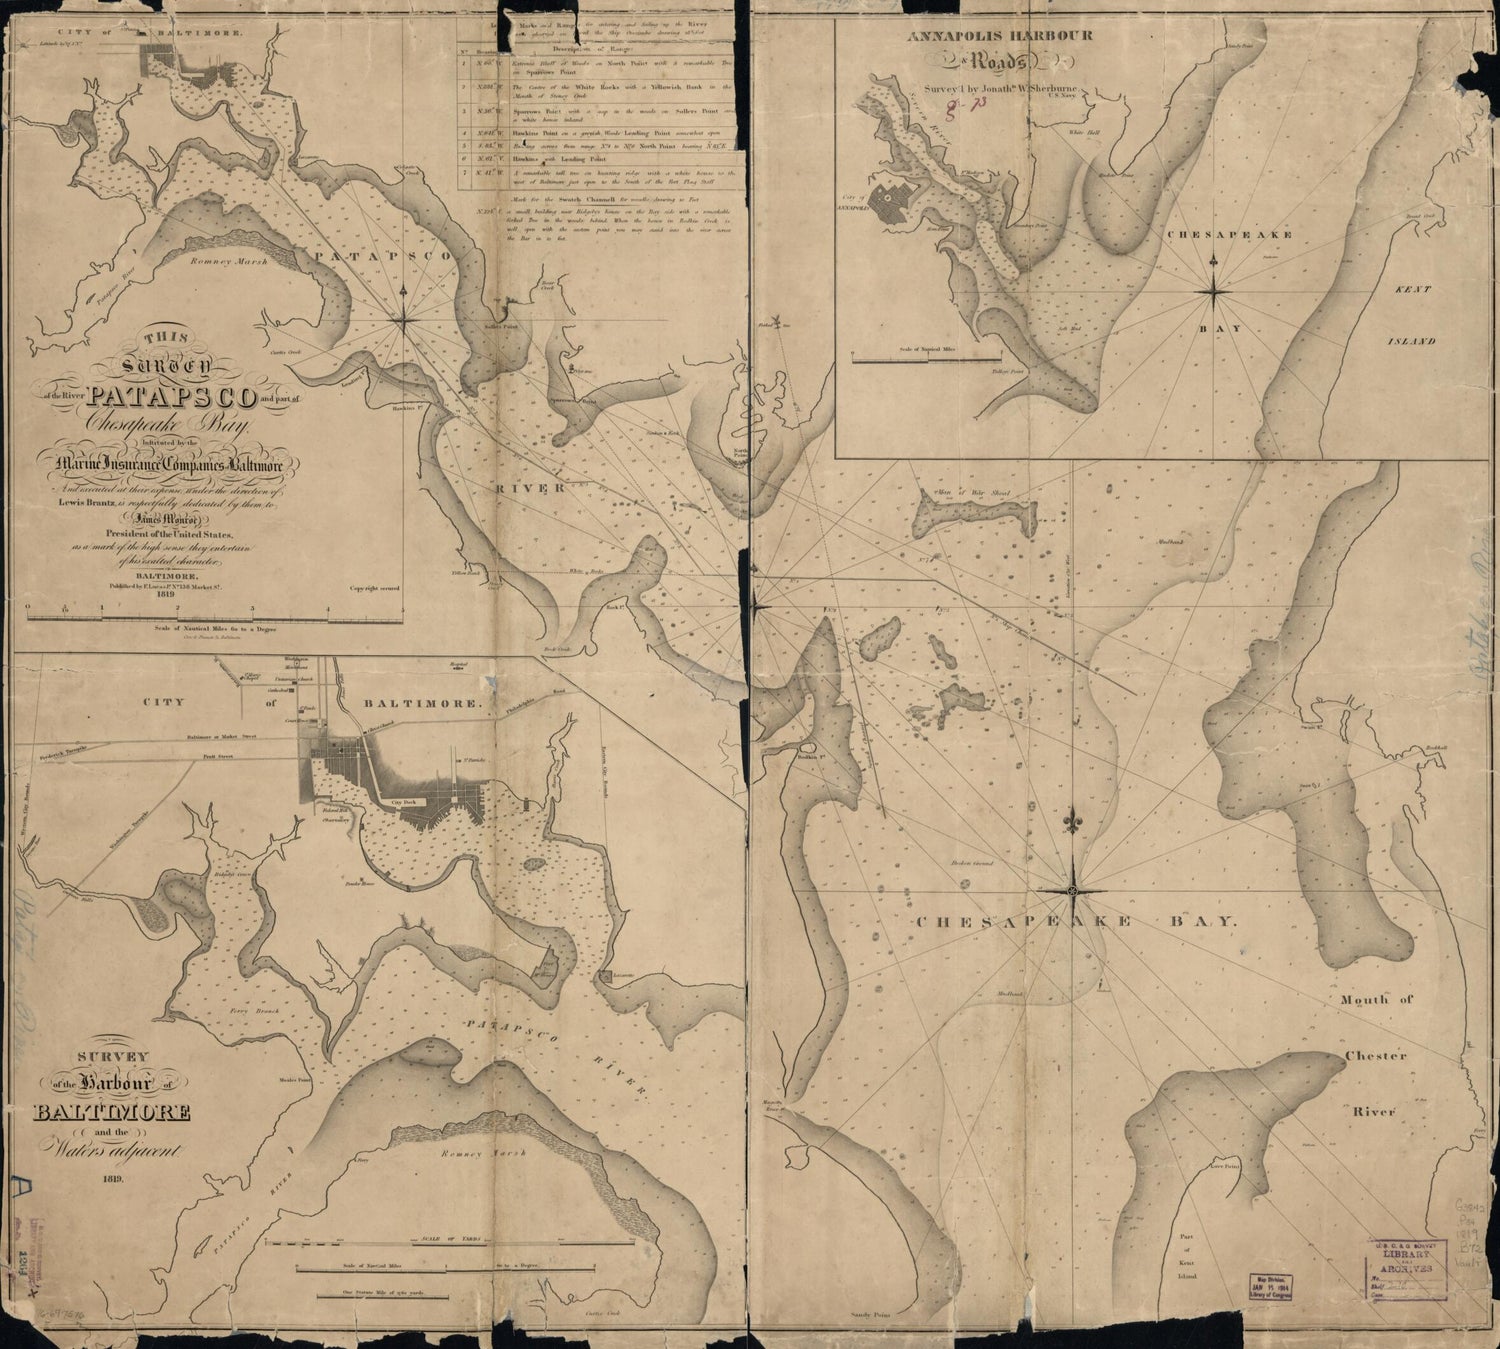 This old map of This Survey of the River Patapsco and Part of Chesapeake Bay from 1819 was created by Lewis Brantz, Fielding Lucas in 1819